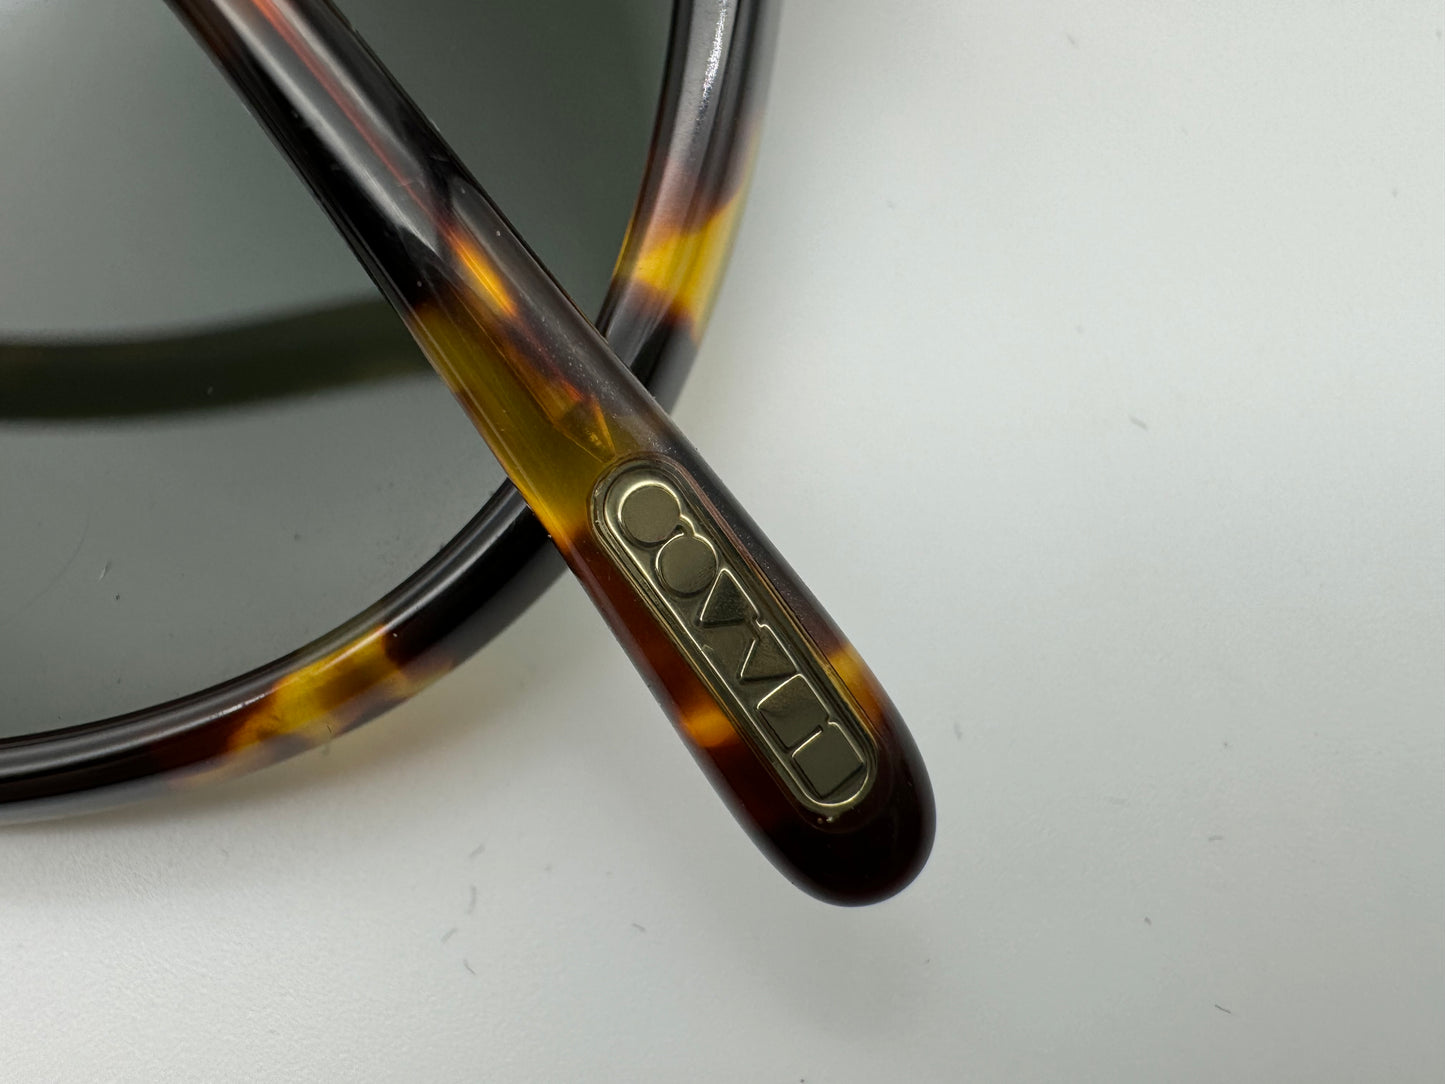 Oliver Peoples Forman 51mm GM2 / G -15 Polarized Lens Italy Open Box